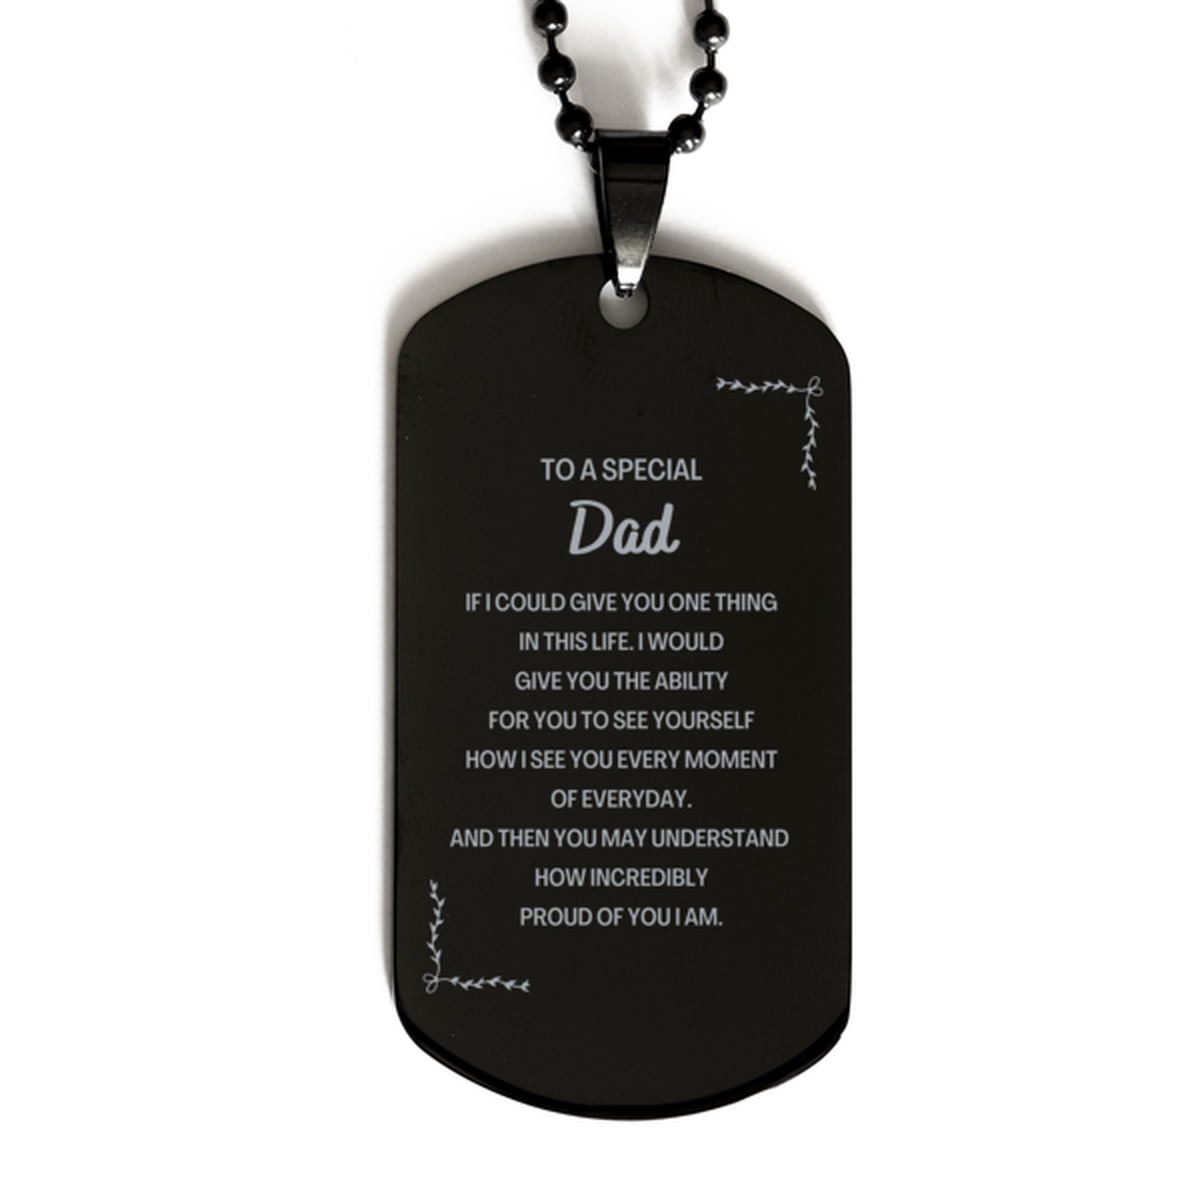 To My Dad Black Dog Tag, Gifts For Dad Engraved, Inspirational Gifts for Christmas Birthday, Epic Gifts for Dad To A Special Dad how incredibly proud of you I am